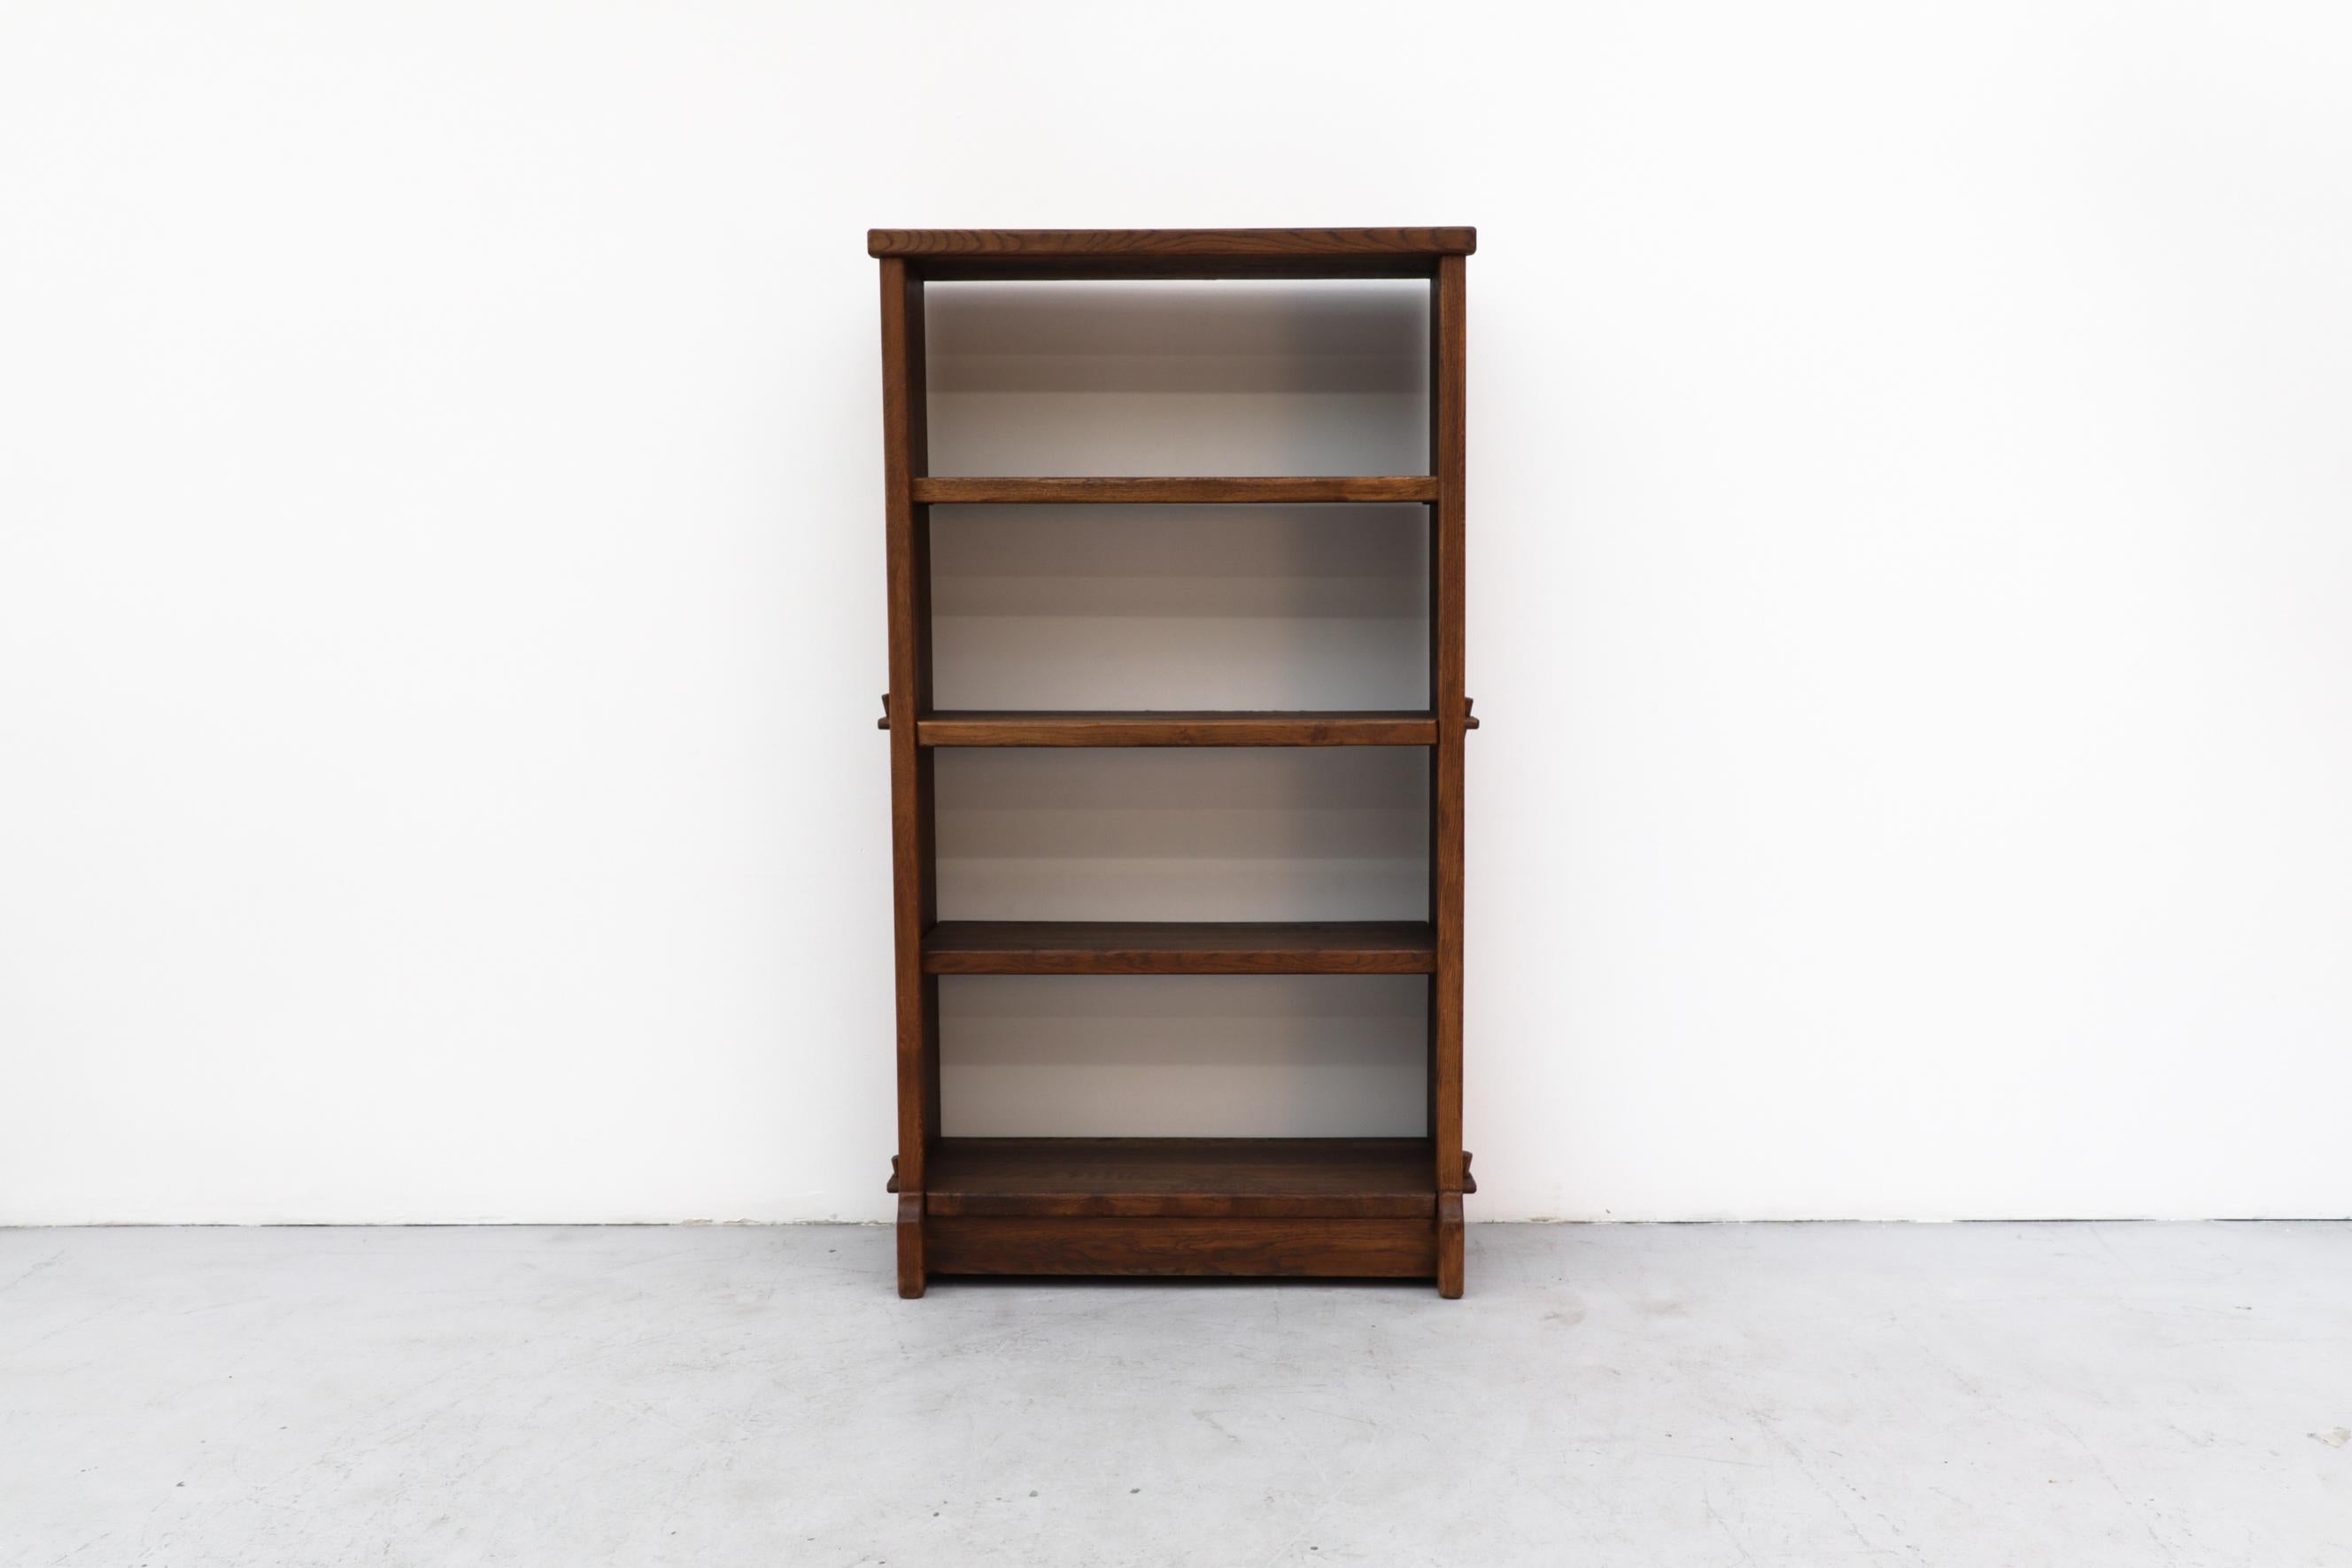 Large Brutalist oak unit with 4 shelves. In original condition with wear that's consistent with its age and use. Other standing shelving units are available and listed separately (LU922428505192).